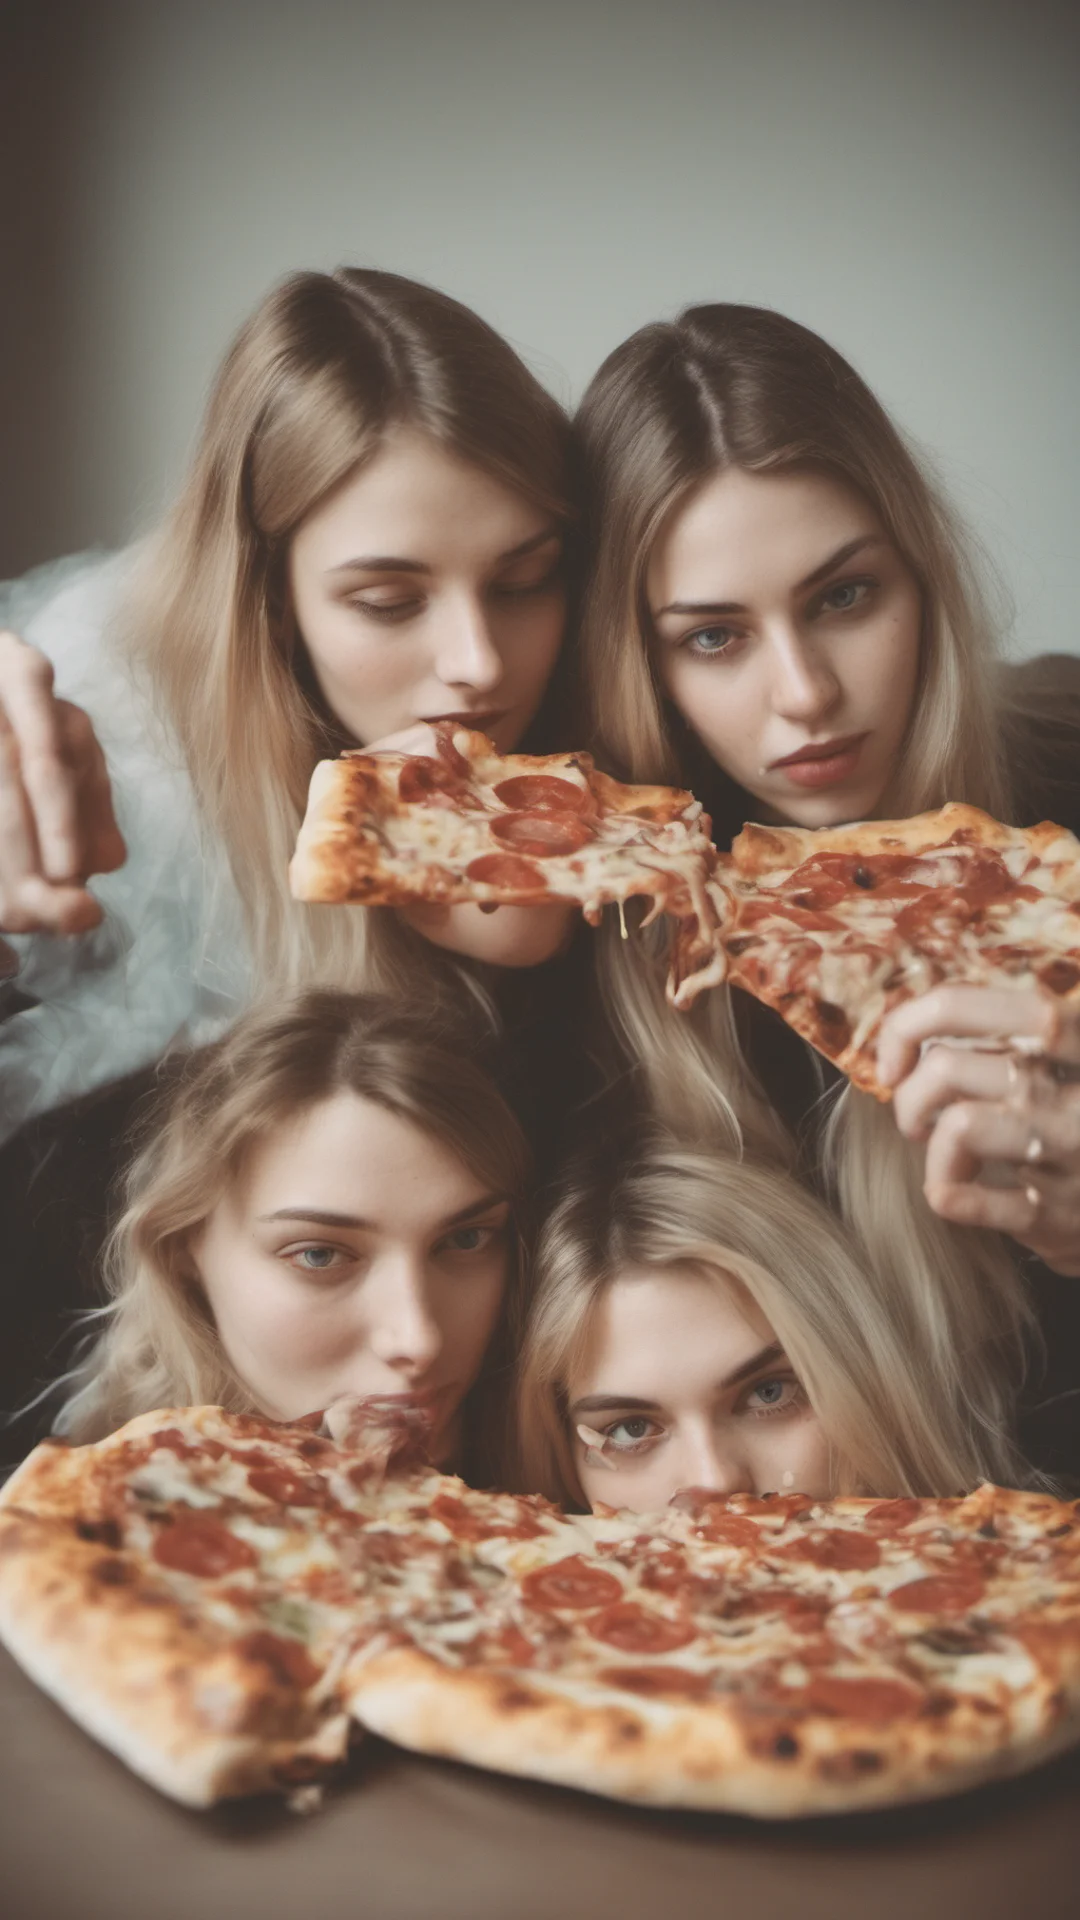 aipolaroid style image of two sensual german girls  22 yo   sharing a dr. oetker pizza ing amazing awesome portrait 2 tall